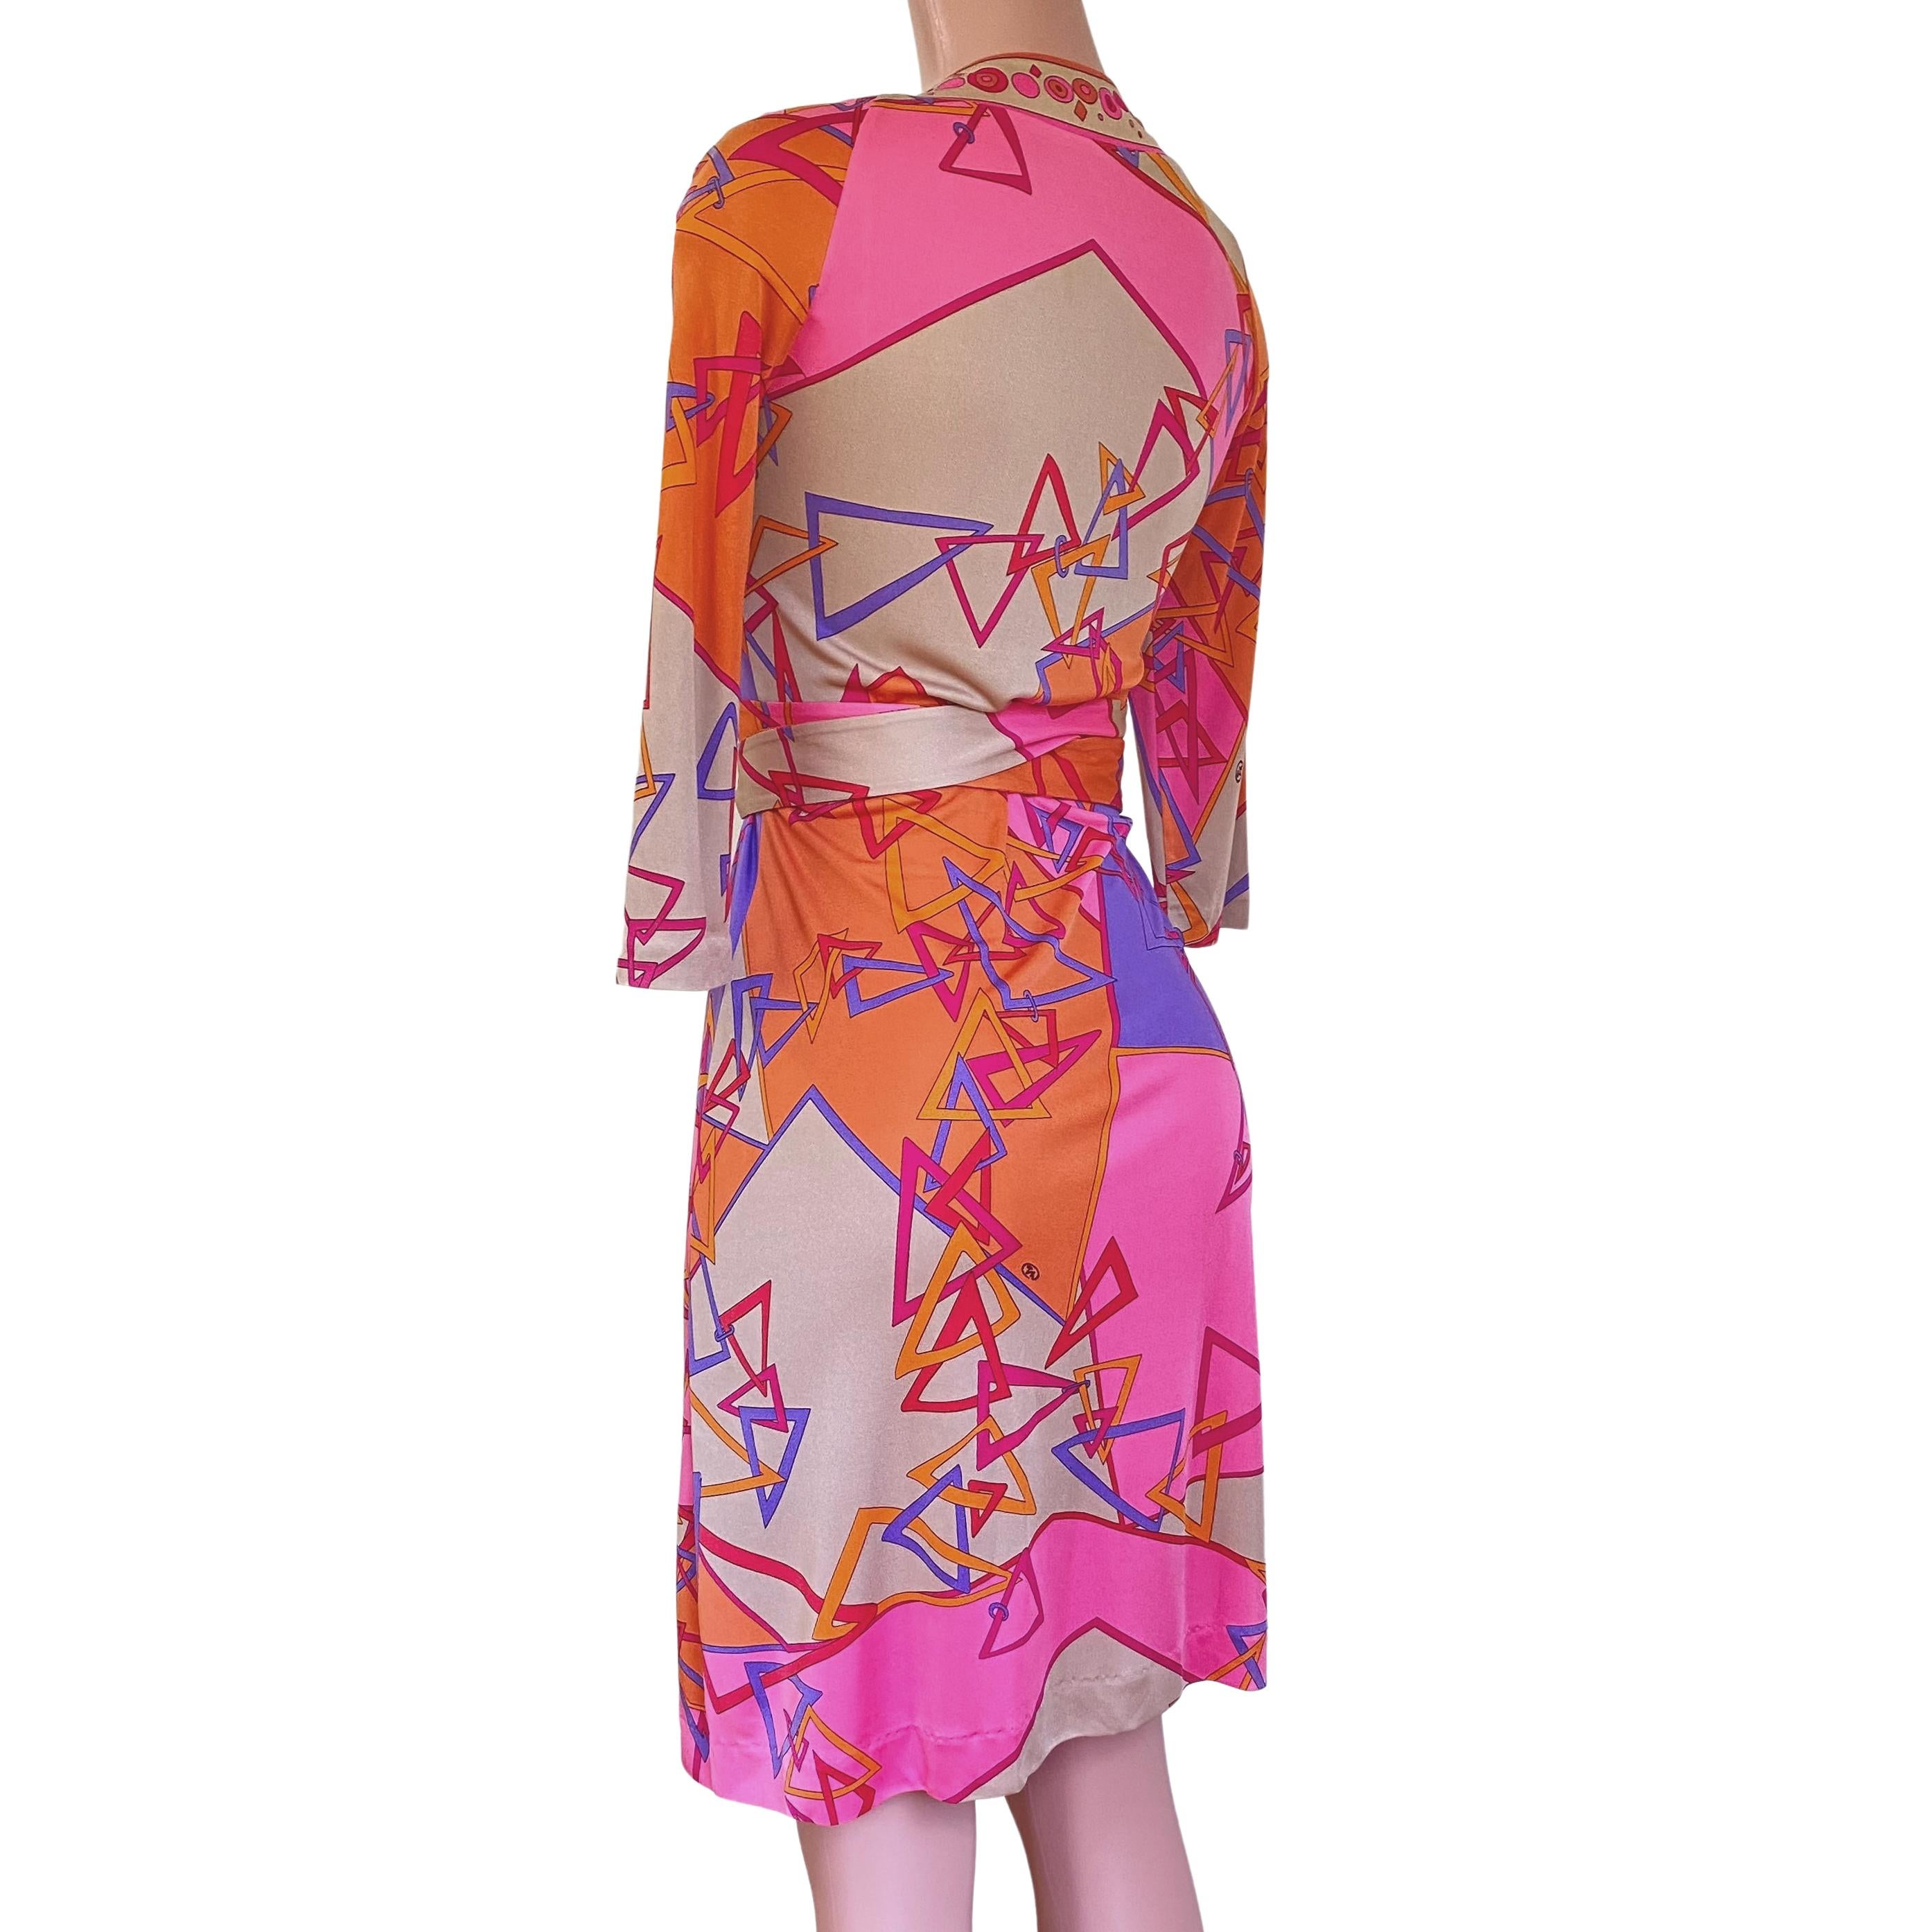 Pink orange original signed triangle mixed fusion print.
True wrap with flattering 3/4 sleeve  
Approximately 41